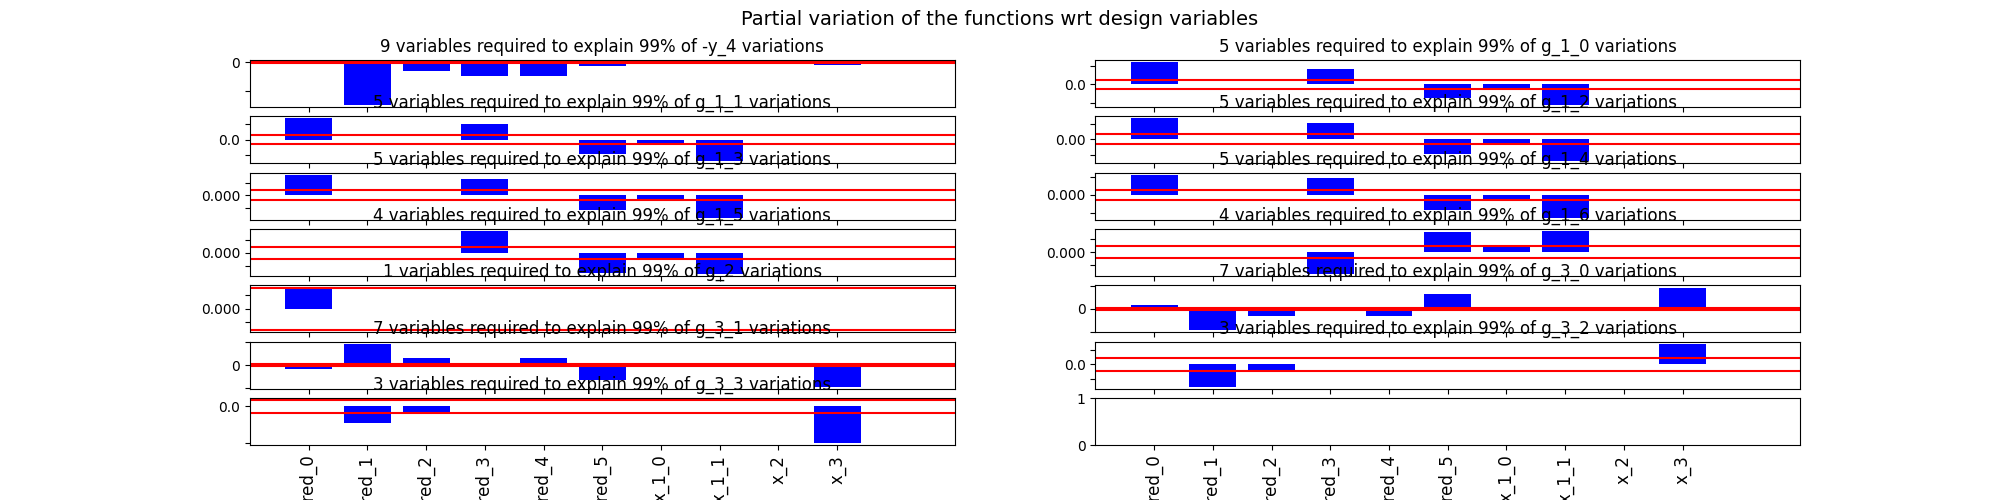 Partial variation of the functions wrt design variables, 9 variables required to explain 99% of -y_4 variations, 5 variables required to explain 99% of g_1_0 variations, 5 variables required to explain 99% of g_1_1 variations, 5 variables required to explain 99% of g_1_2 variations, 5 variables required to explain 99% of g_1_3 variations, 5 variables required to explain 99% of g_1_4 variations, 4 variables required to explain 99% of g_1_5 variations, 4 variables required to explain 99% of g_1_6 variations, 1 variables required to explain 99% of g_2 variations, 7 variables required to explain 99% of g_3_0 variations, 7 variables required to explain 99% of g_3_1 variations, 3 variables required to explain 99% of g_3_2 variations, 3 variables required to explain 99% of g_3_3 variations